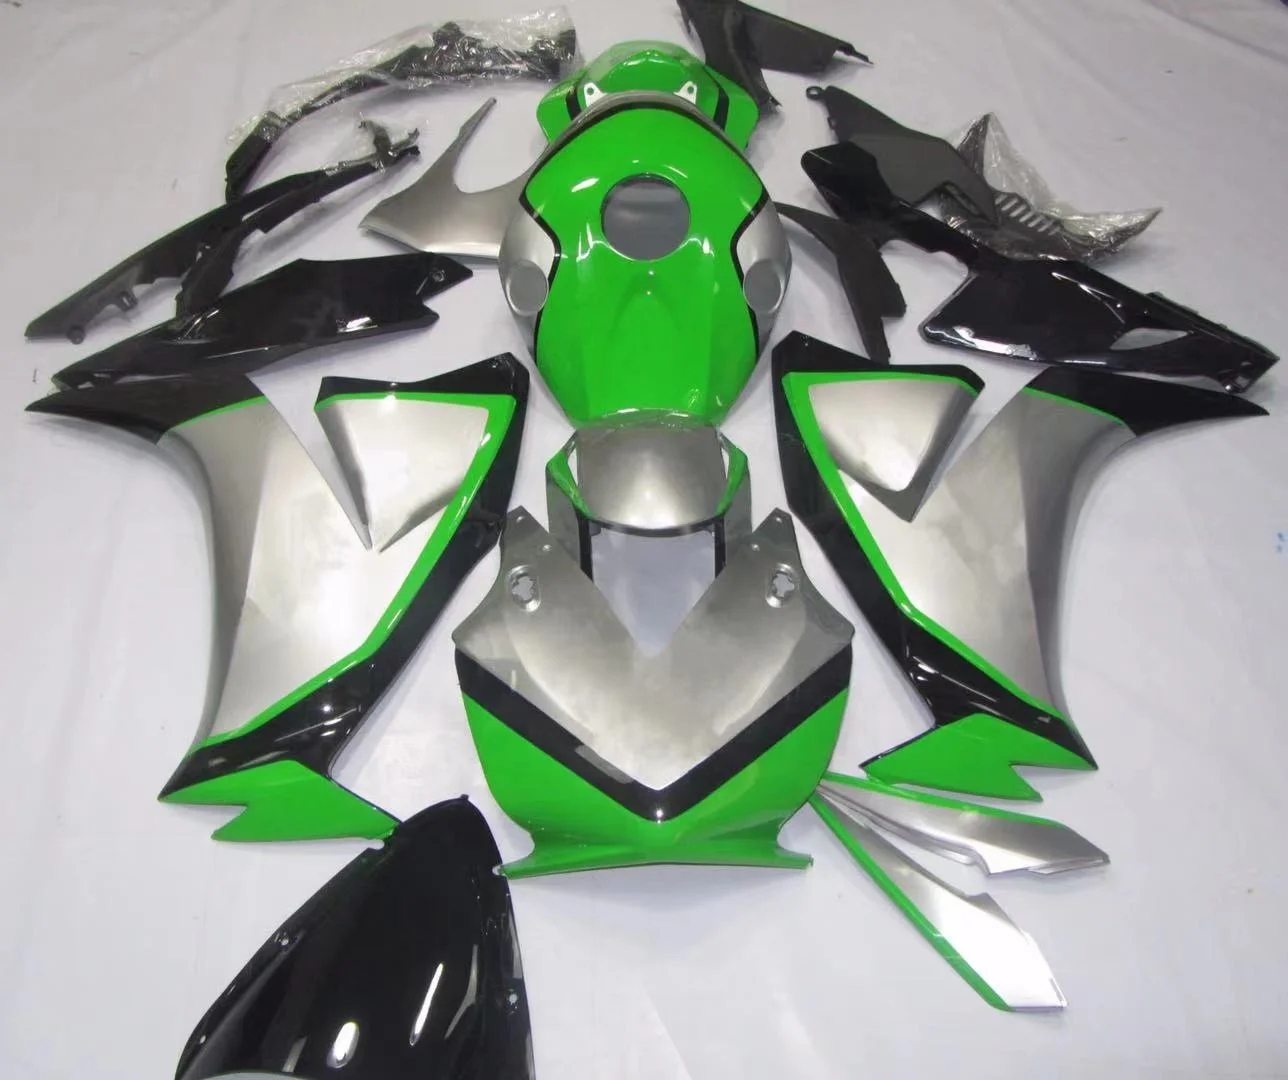 

2021 WHSC ABS Plastic Fairing Kit For HONDA CBR1000 2012-2014 Bodywork Cowling Kit Green Silver, Pictures shown